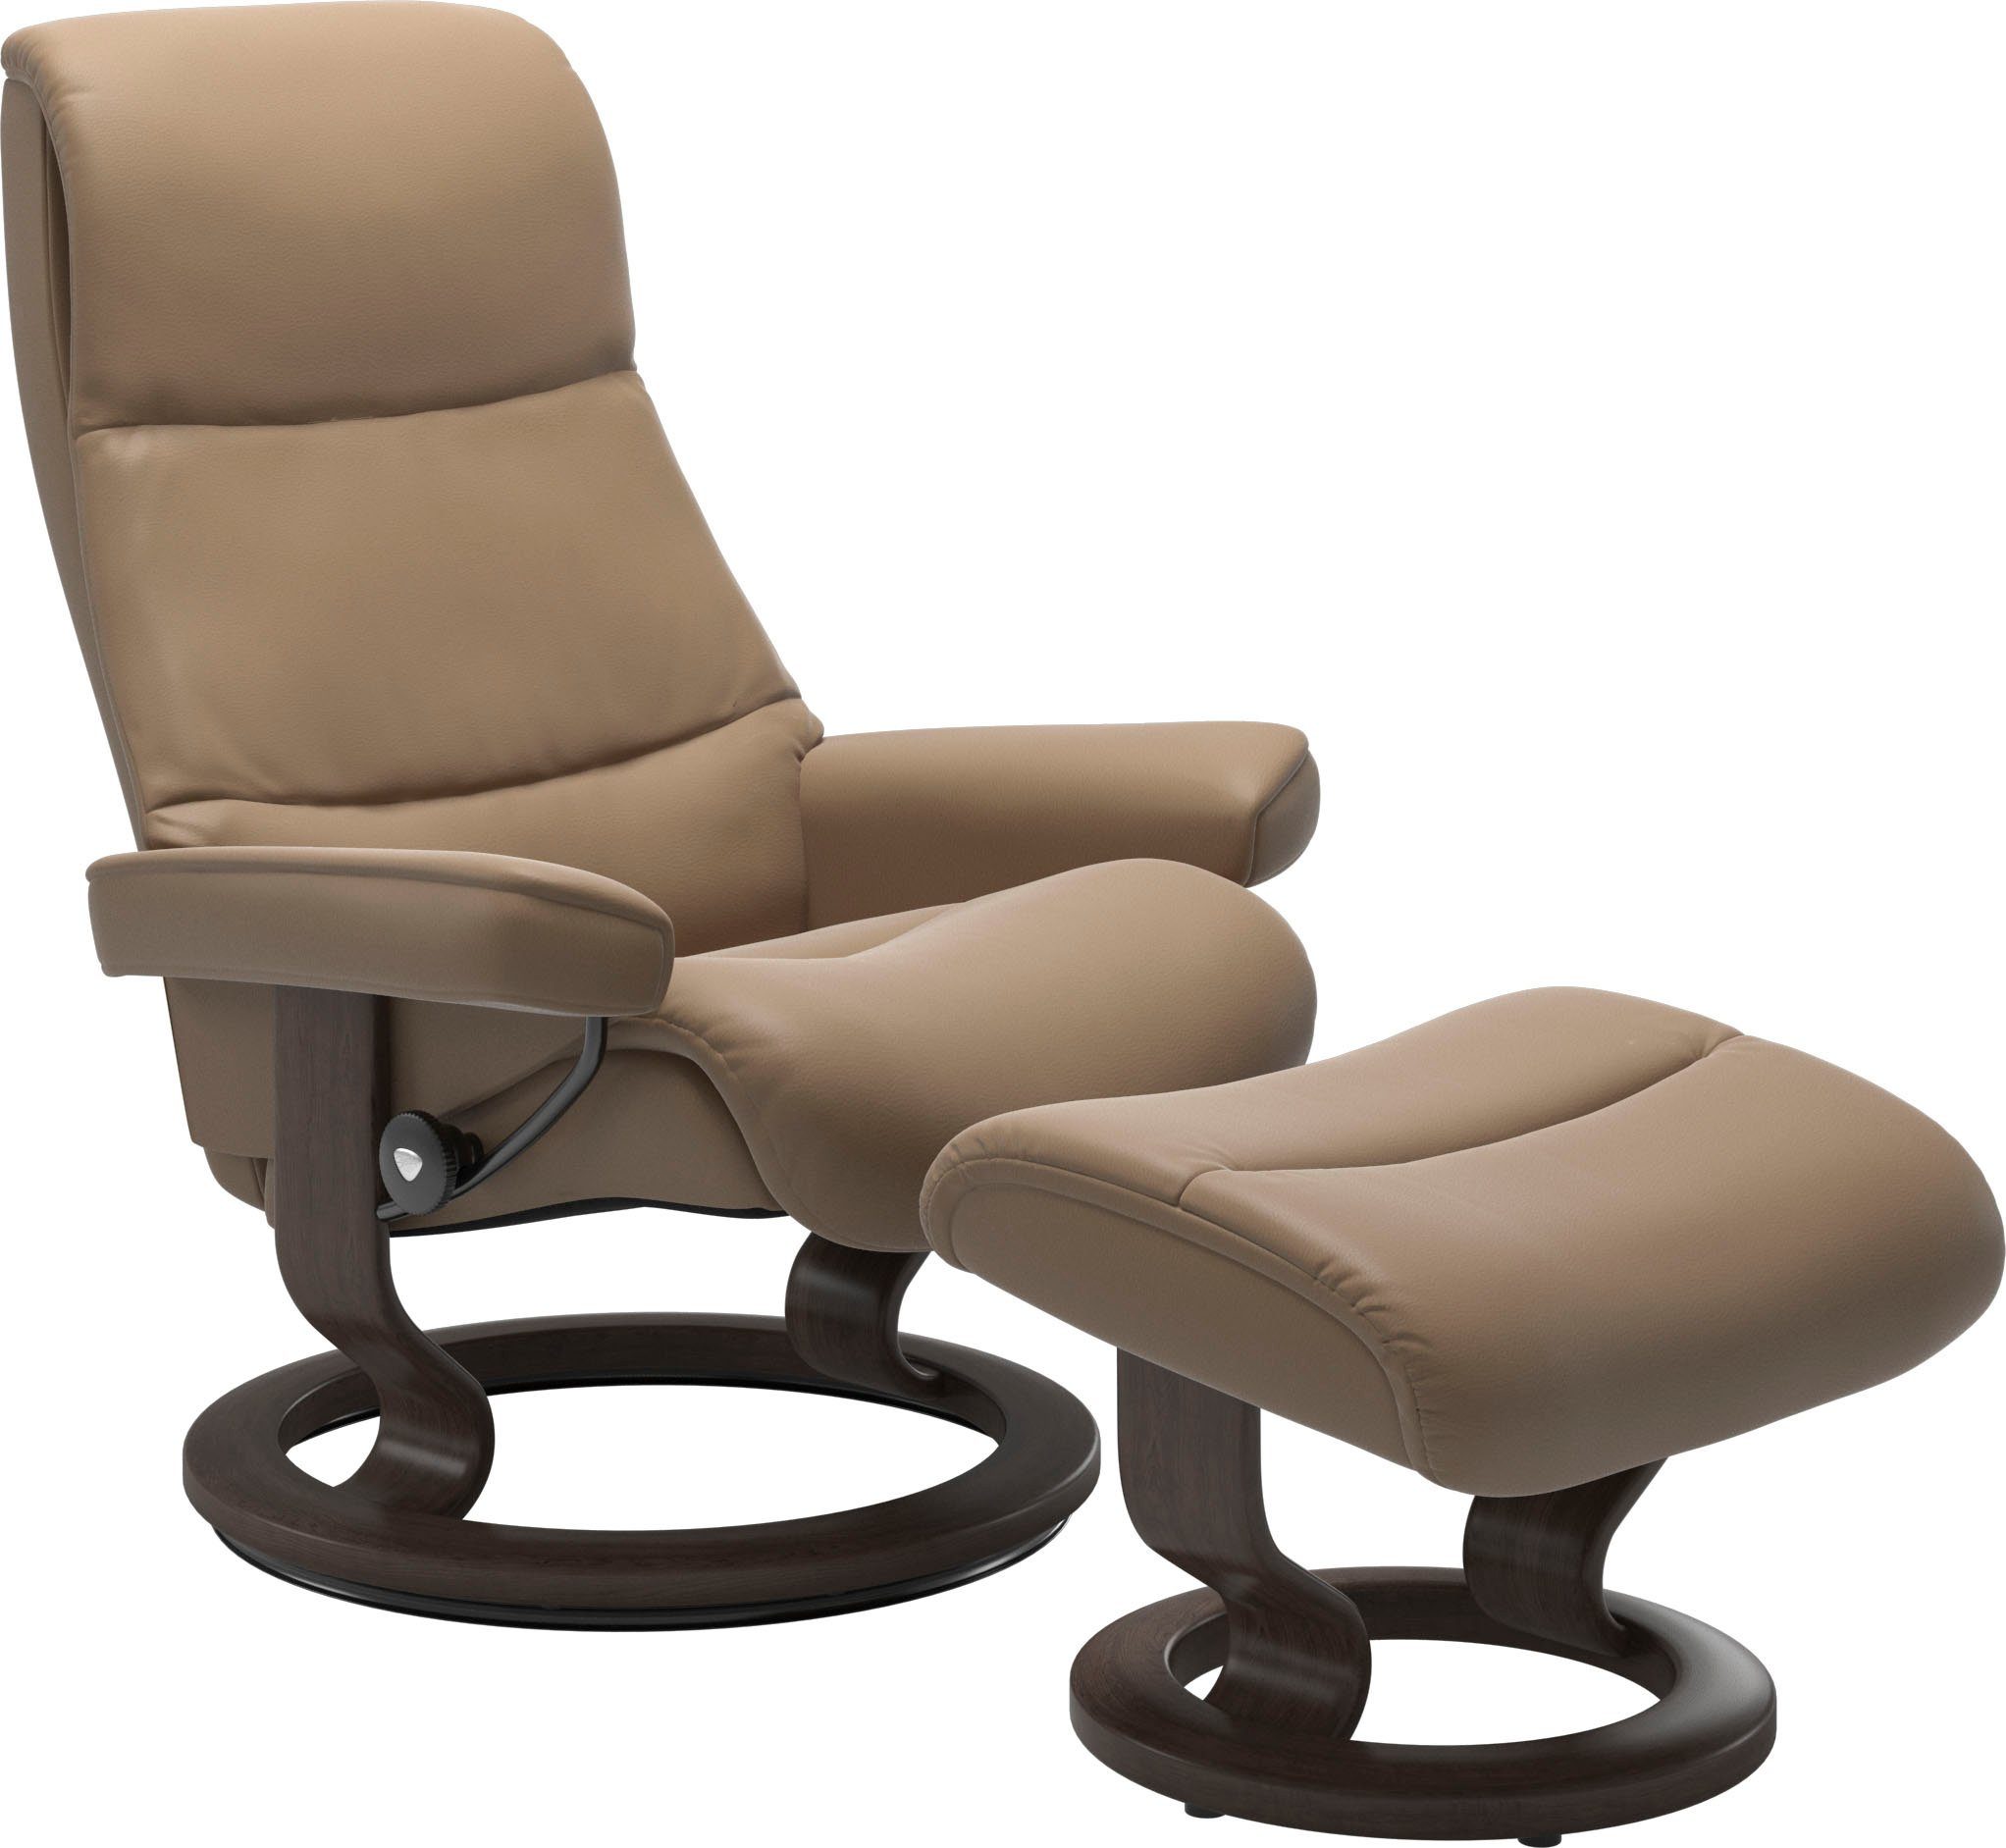 Stressless® Relaxsessel View (Set, Relaxsessel mit Hocker), mit Classic Base, Größe L,Gestell Wenge | Funktionssessel